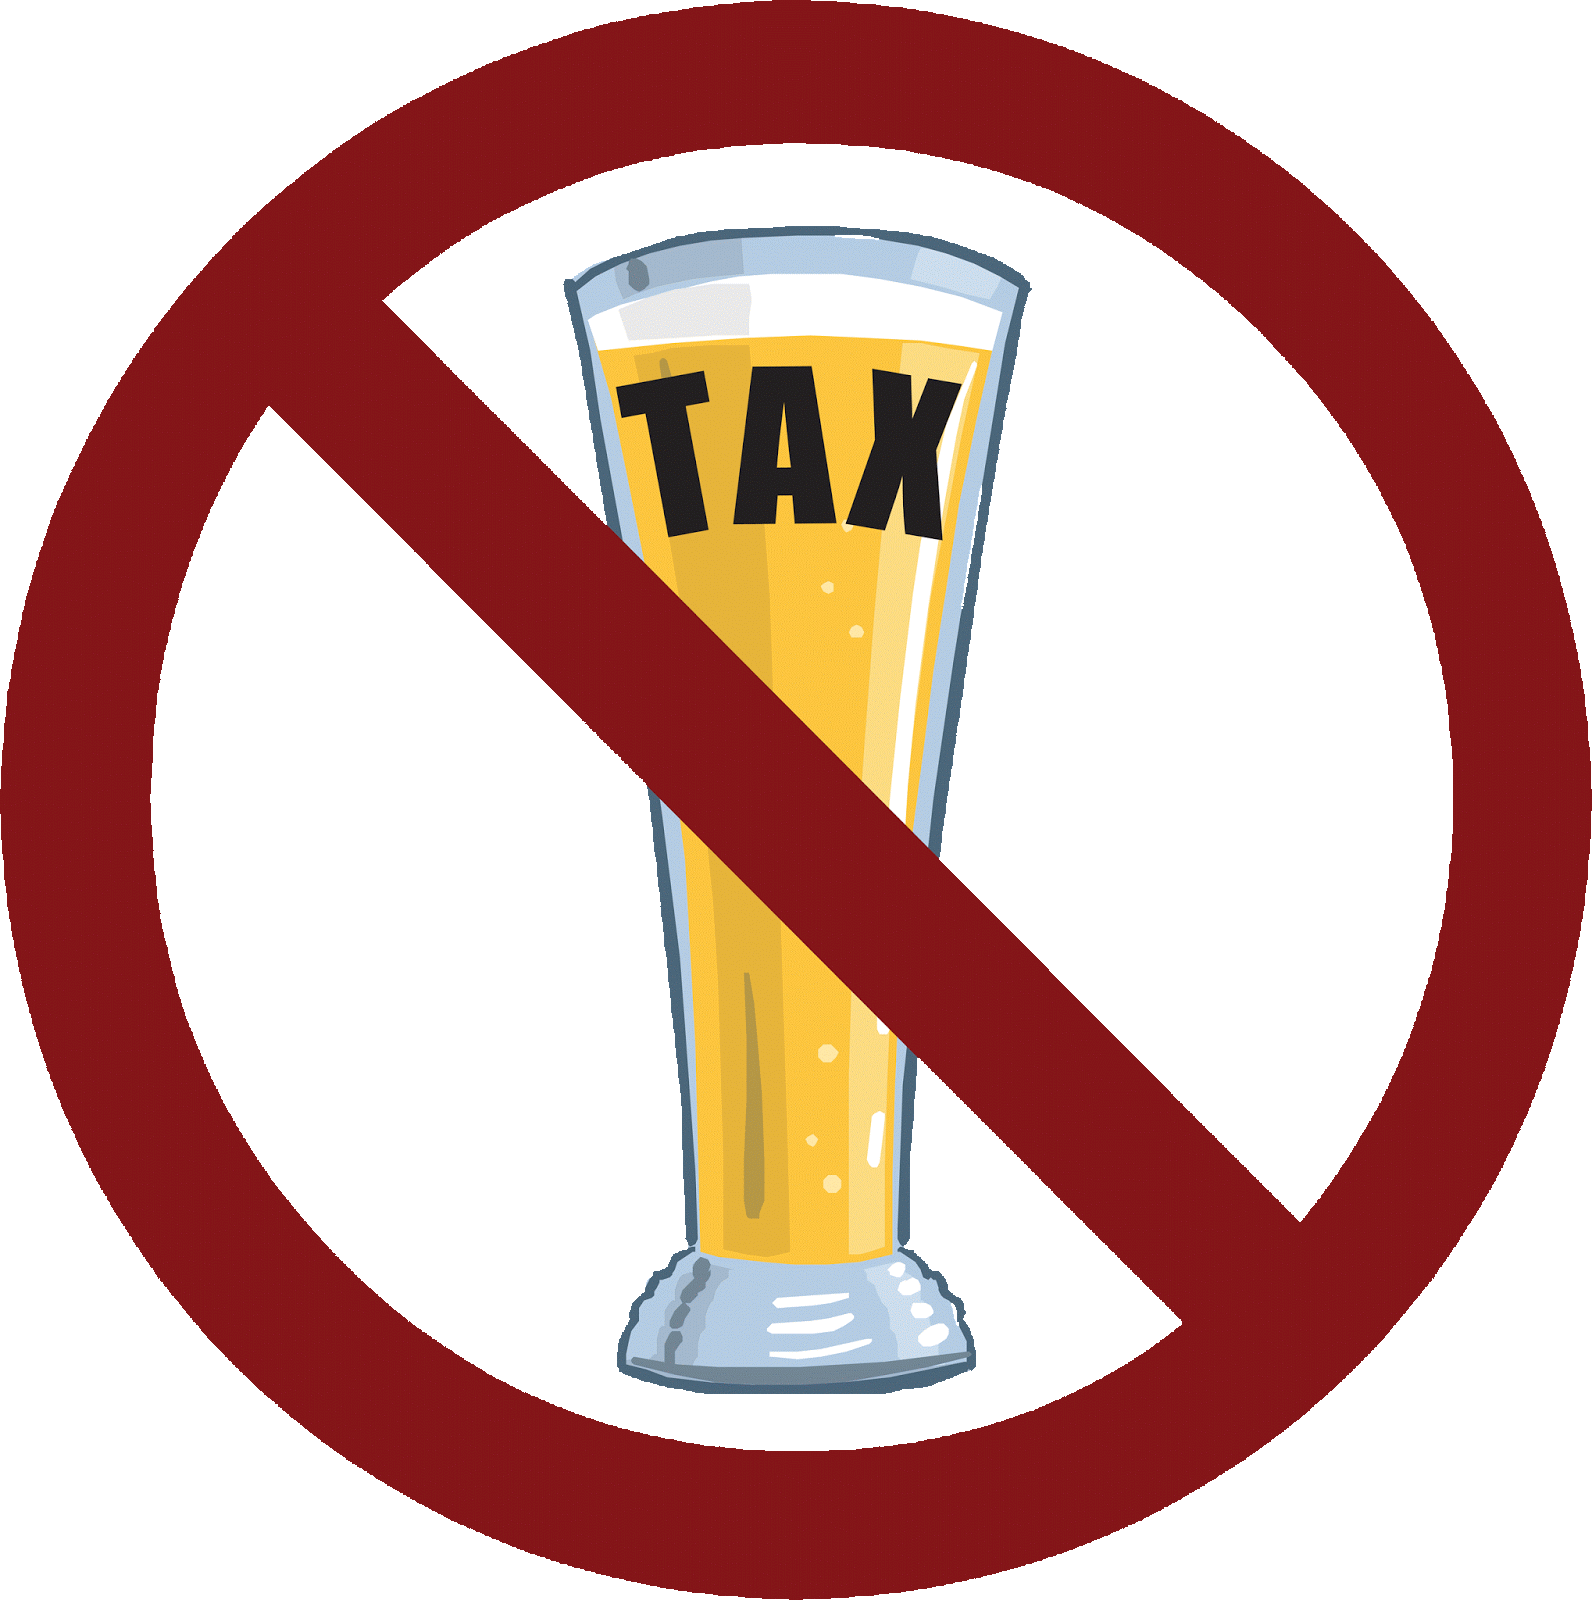 Drinking on the last. Want clipart excise tax